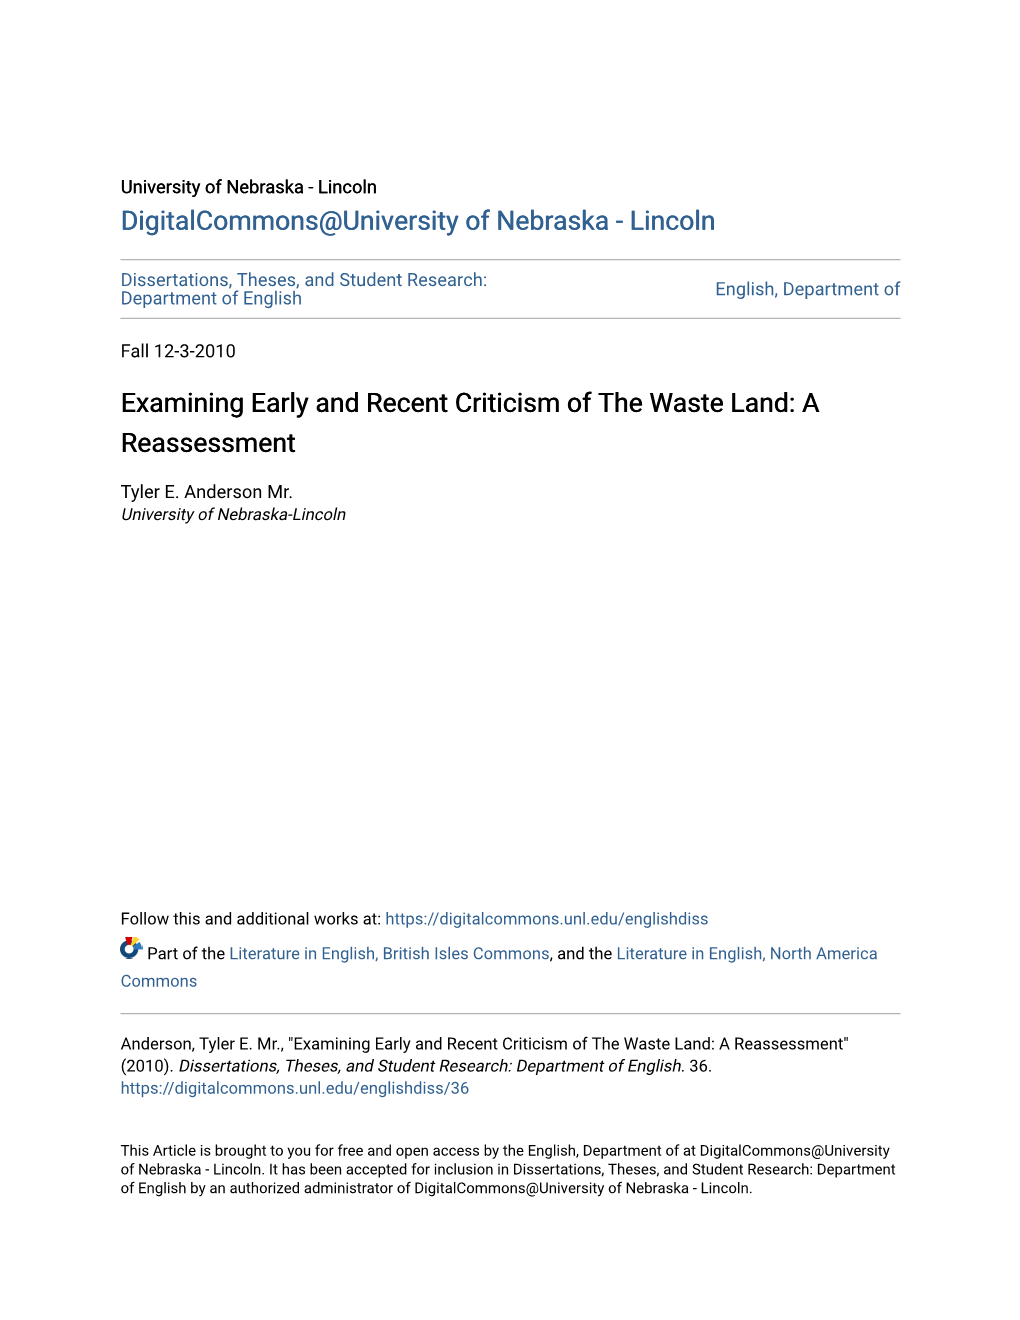 Examining Early and Recent Criticism of the Waste Land: a Reassessment